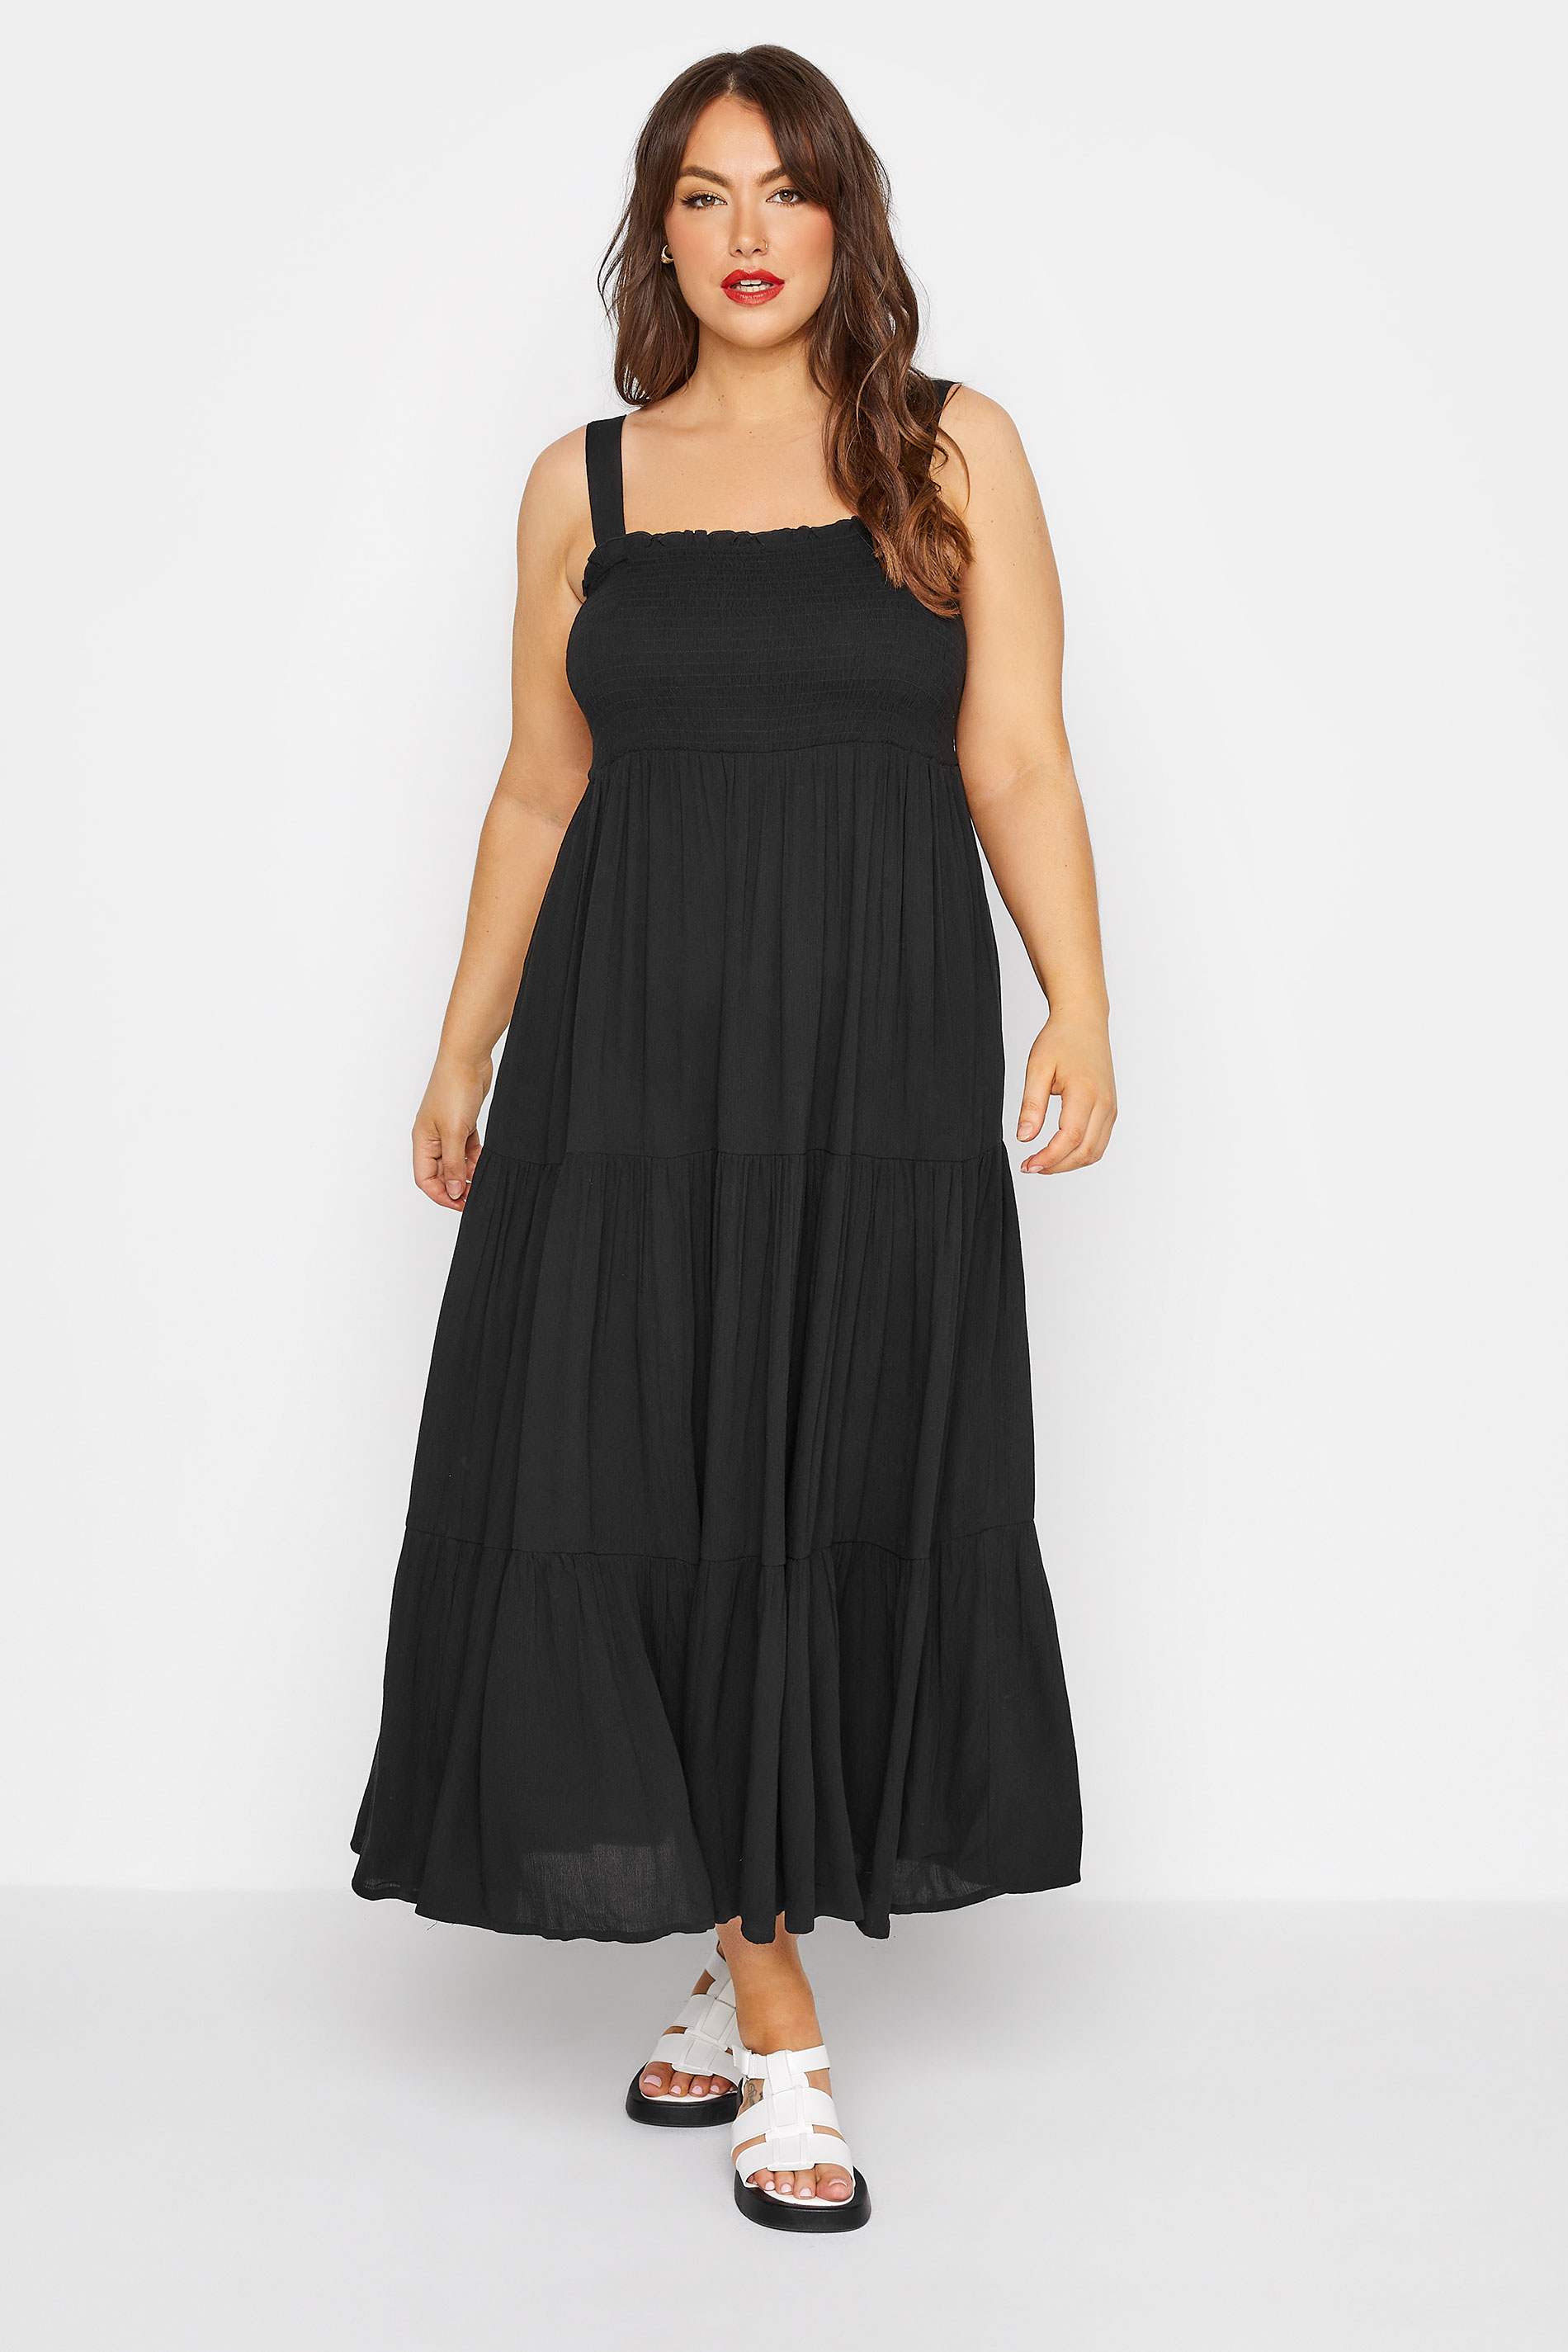 LIMITED COLLECTION Curve Black Strappy Shirred Tier Dress_A.jpg